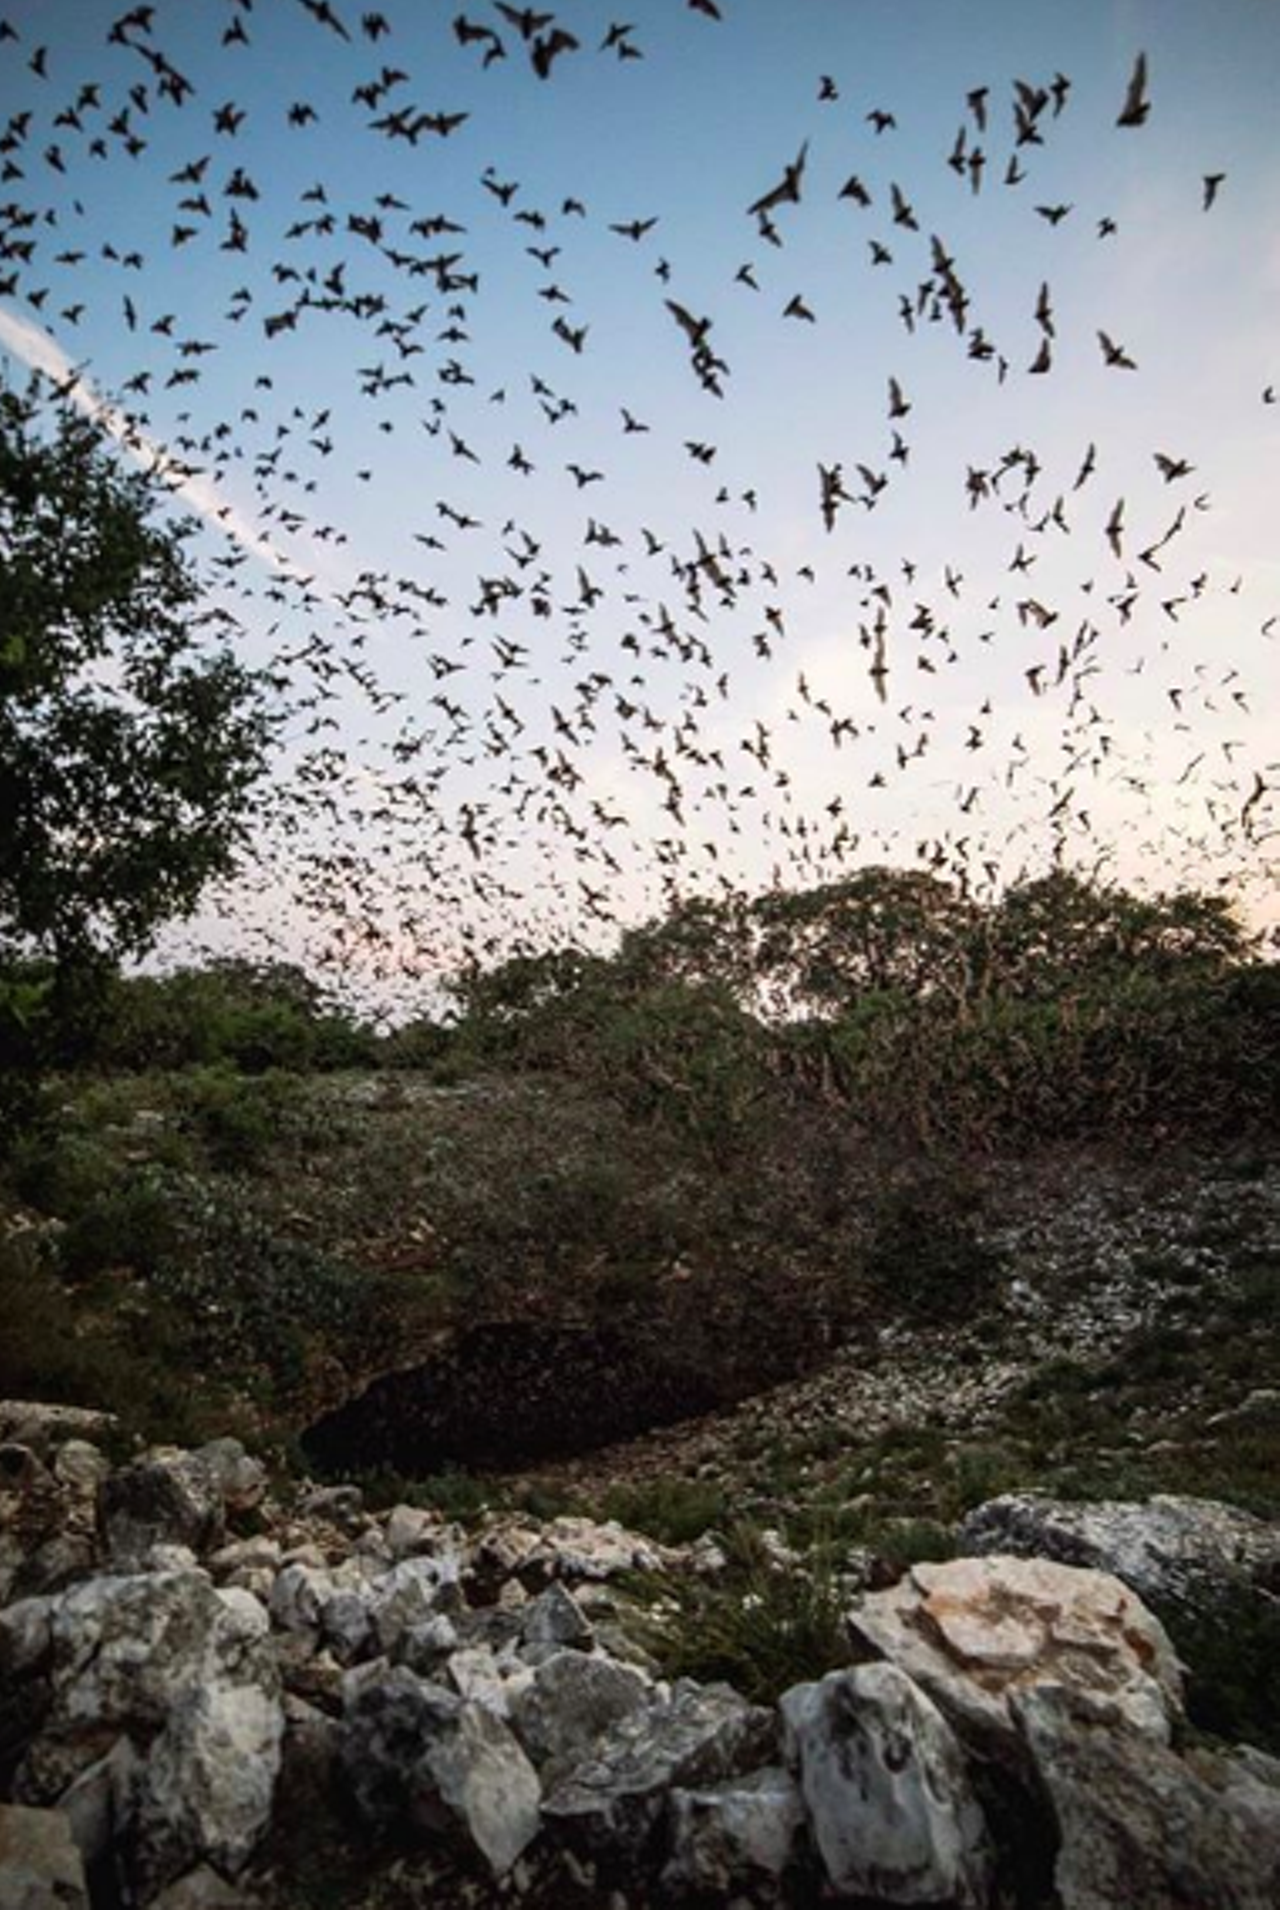 Catch the show at Bracken Cave
26101 FM 3009, tpwd.texas.gov
A seasonal home to Mexican free-tailed bats, Bracken Cave is a local landmark that should not be missed. You’ll be smart to plan your trip during the season so you can catch the bats emerging from the cave. If you and your love are into spooky shit, this is definitely your type of date.
Photo via Instagram / u1tralord